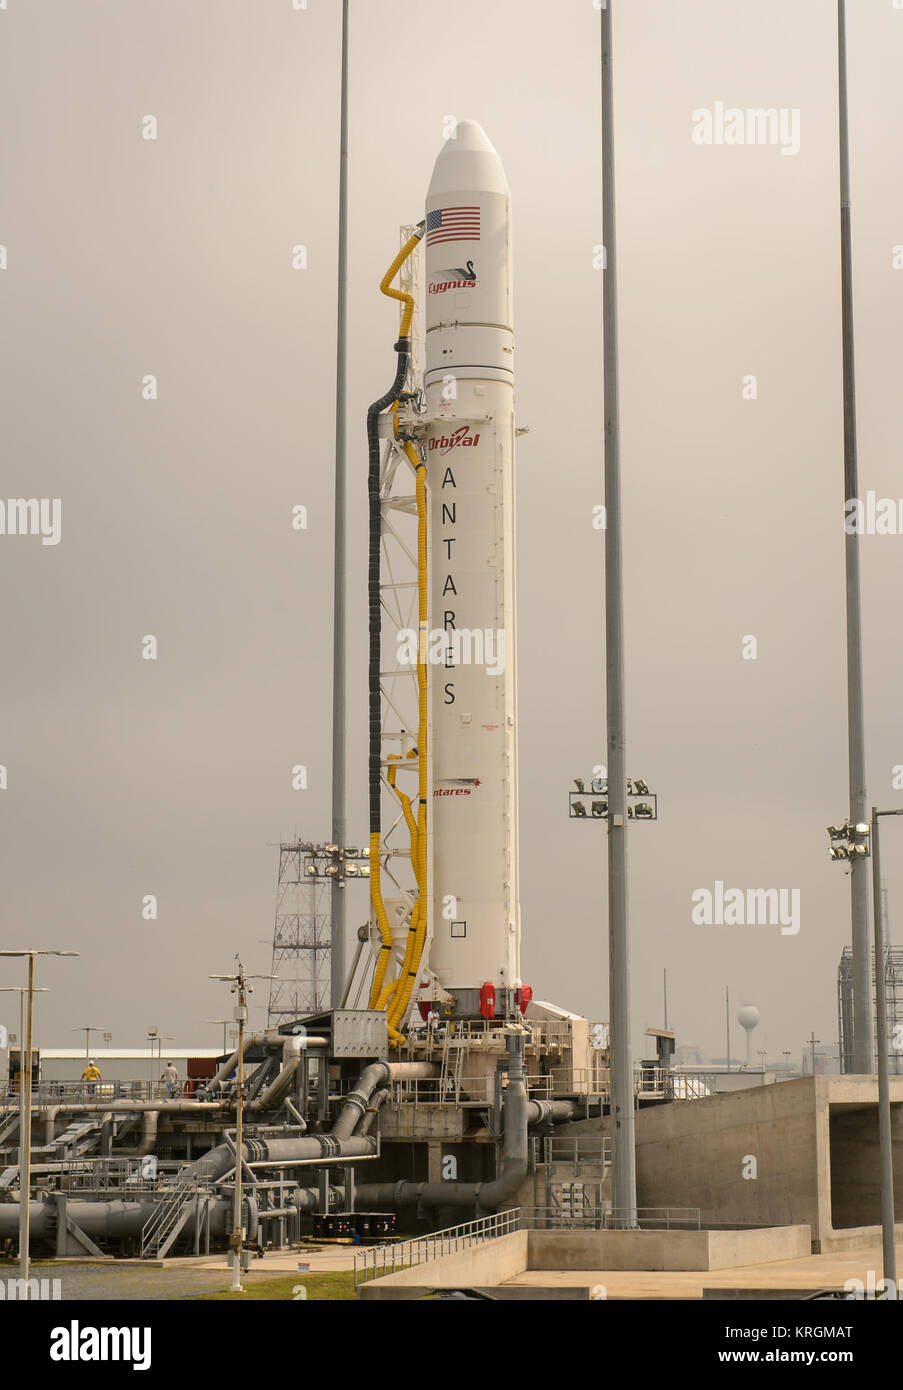 The Orbital Sciences Corporation Antares rocket, with the Cygnus spacecraft onboard, is seen on launch Pad-0A, Friday, July 11, 2014, at NASA's Wallops Flight Facility in Virginia. The Antares will launch with the Cygnus spacecraft filled with over 3,000 pounds of supplies for the International Space Station, including science experiments, experiment hardware, spare parts, and crew provisions. The Orbital-2 mission is Orbital Sciences' second contracted cargo delivery flight to the space station for NASA. Photo Credit: (NASA/Bill Ingalls) Antares Orb-2 at Wallops pad (201407110001HQ) Stock Photo